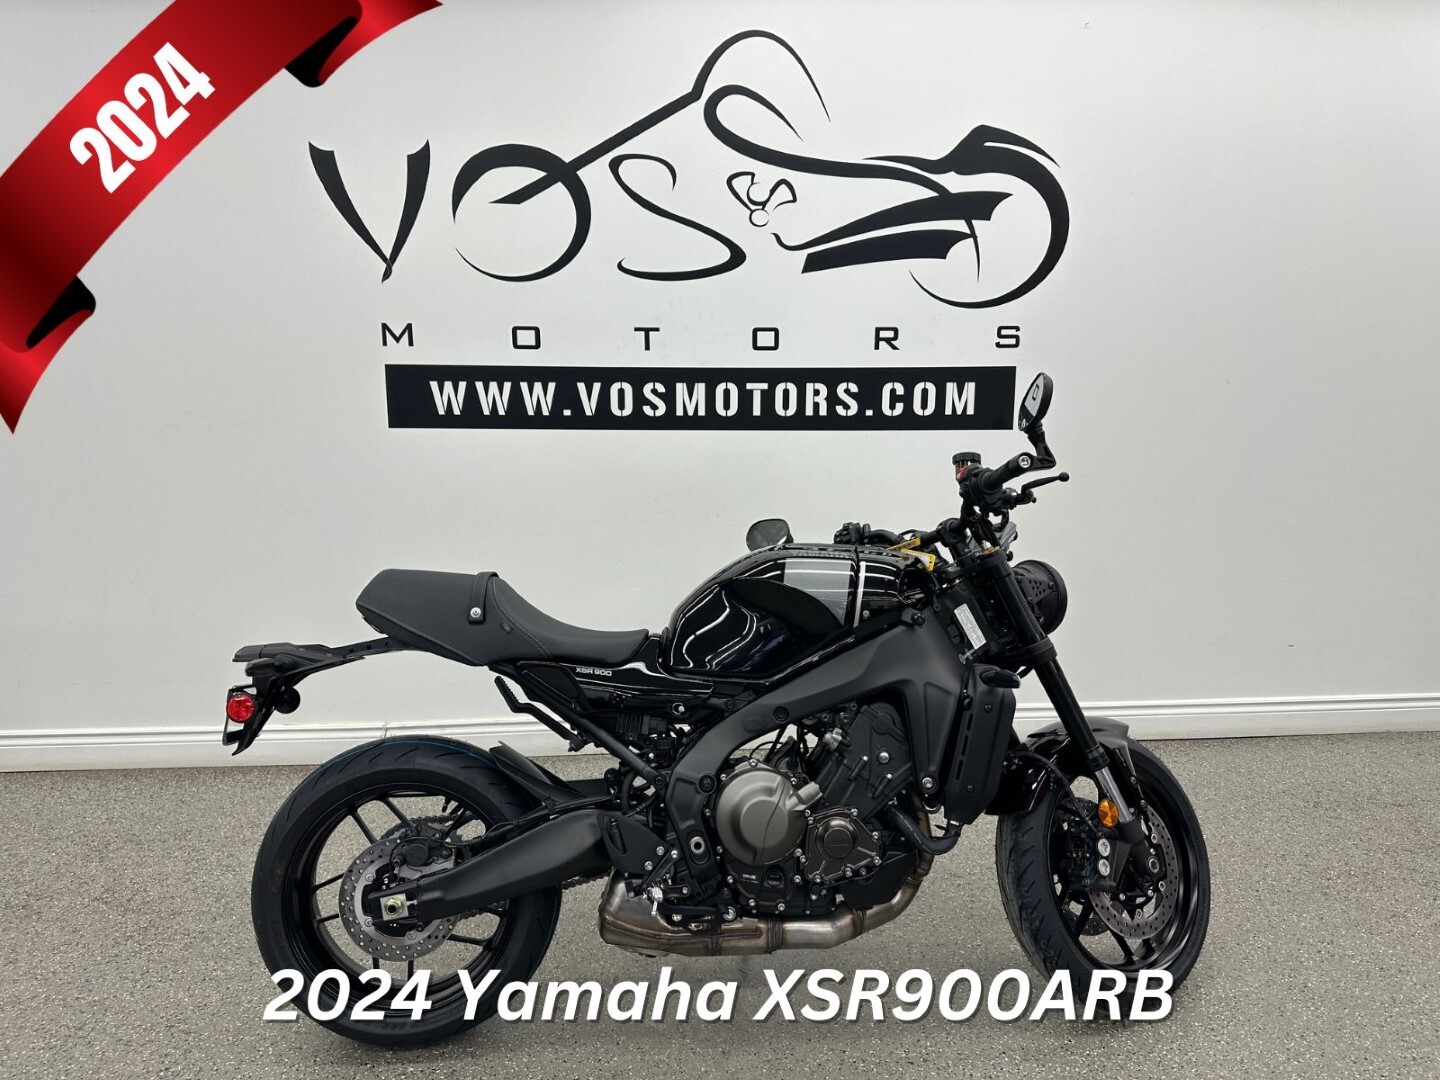 2024 Yamaha XSR900ARB XSR900ARB - V5444 - -No Payments for 1 Year**